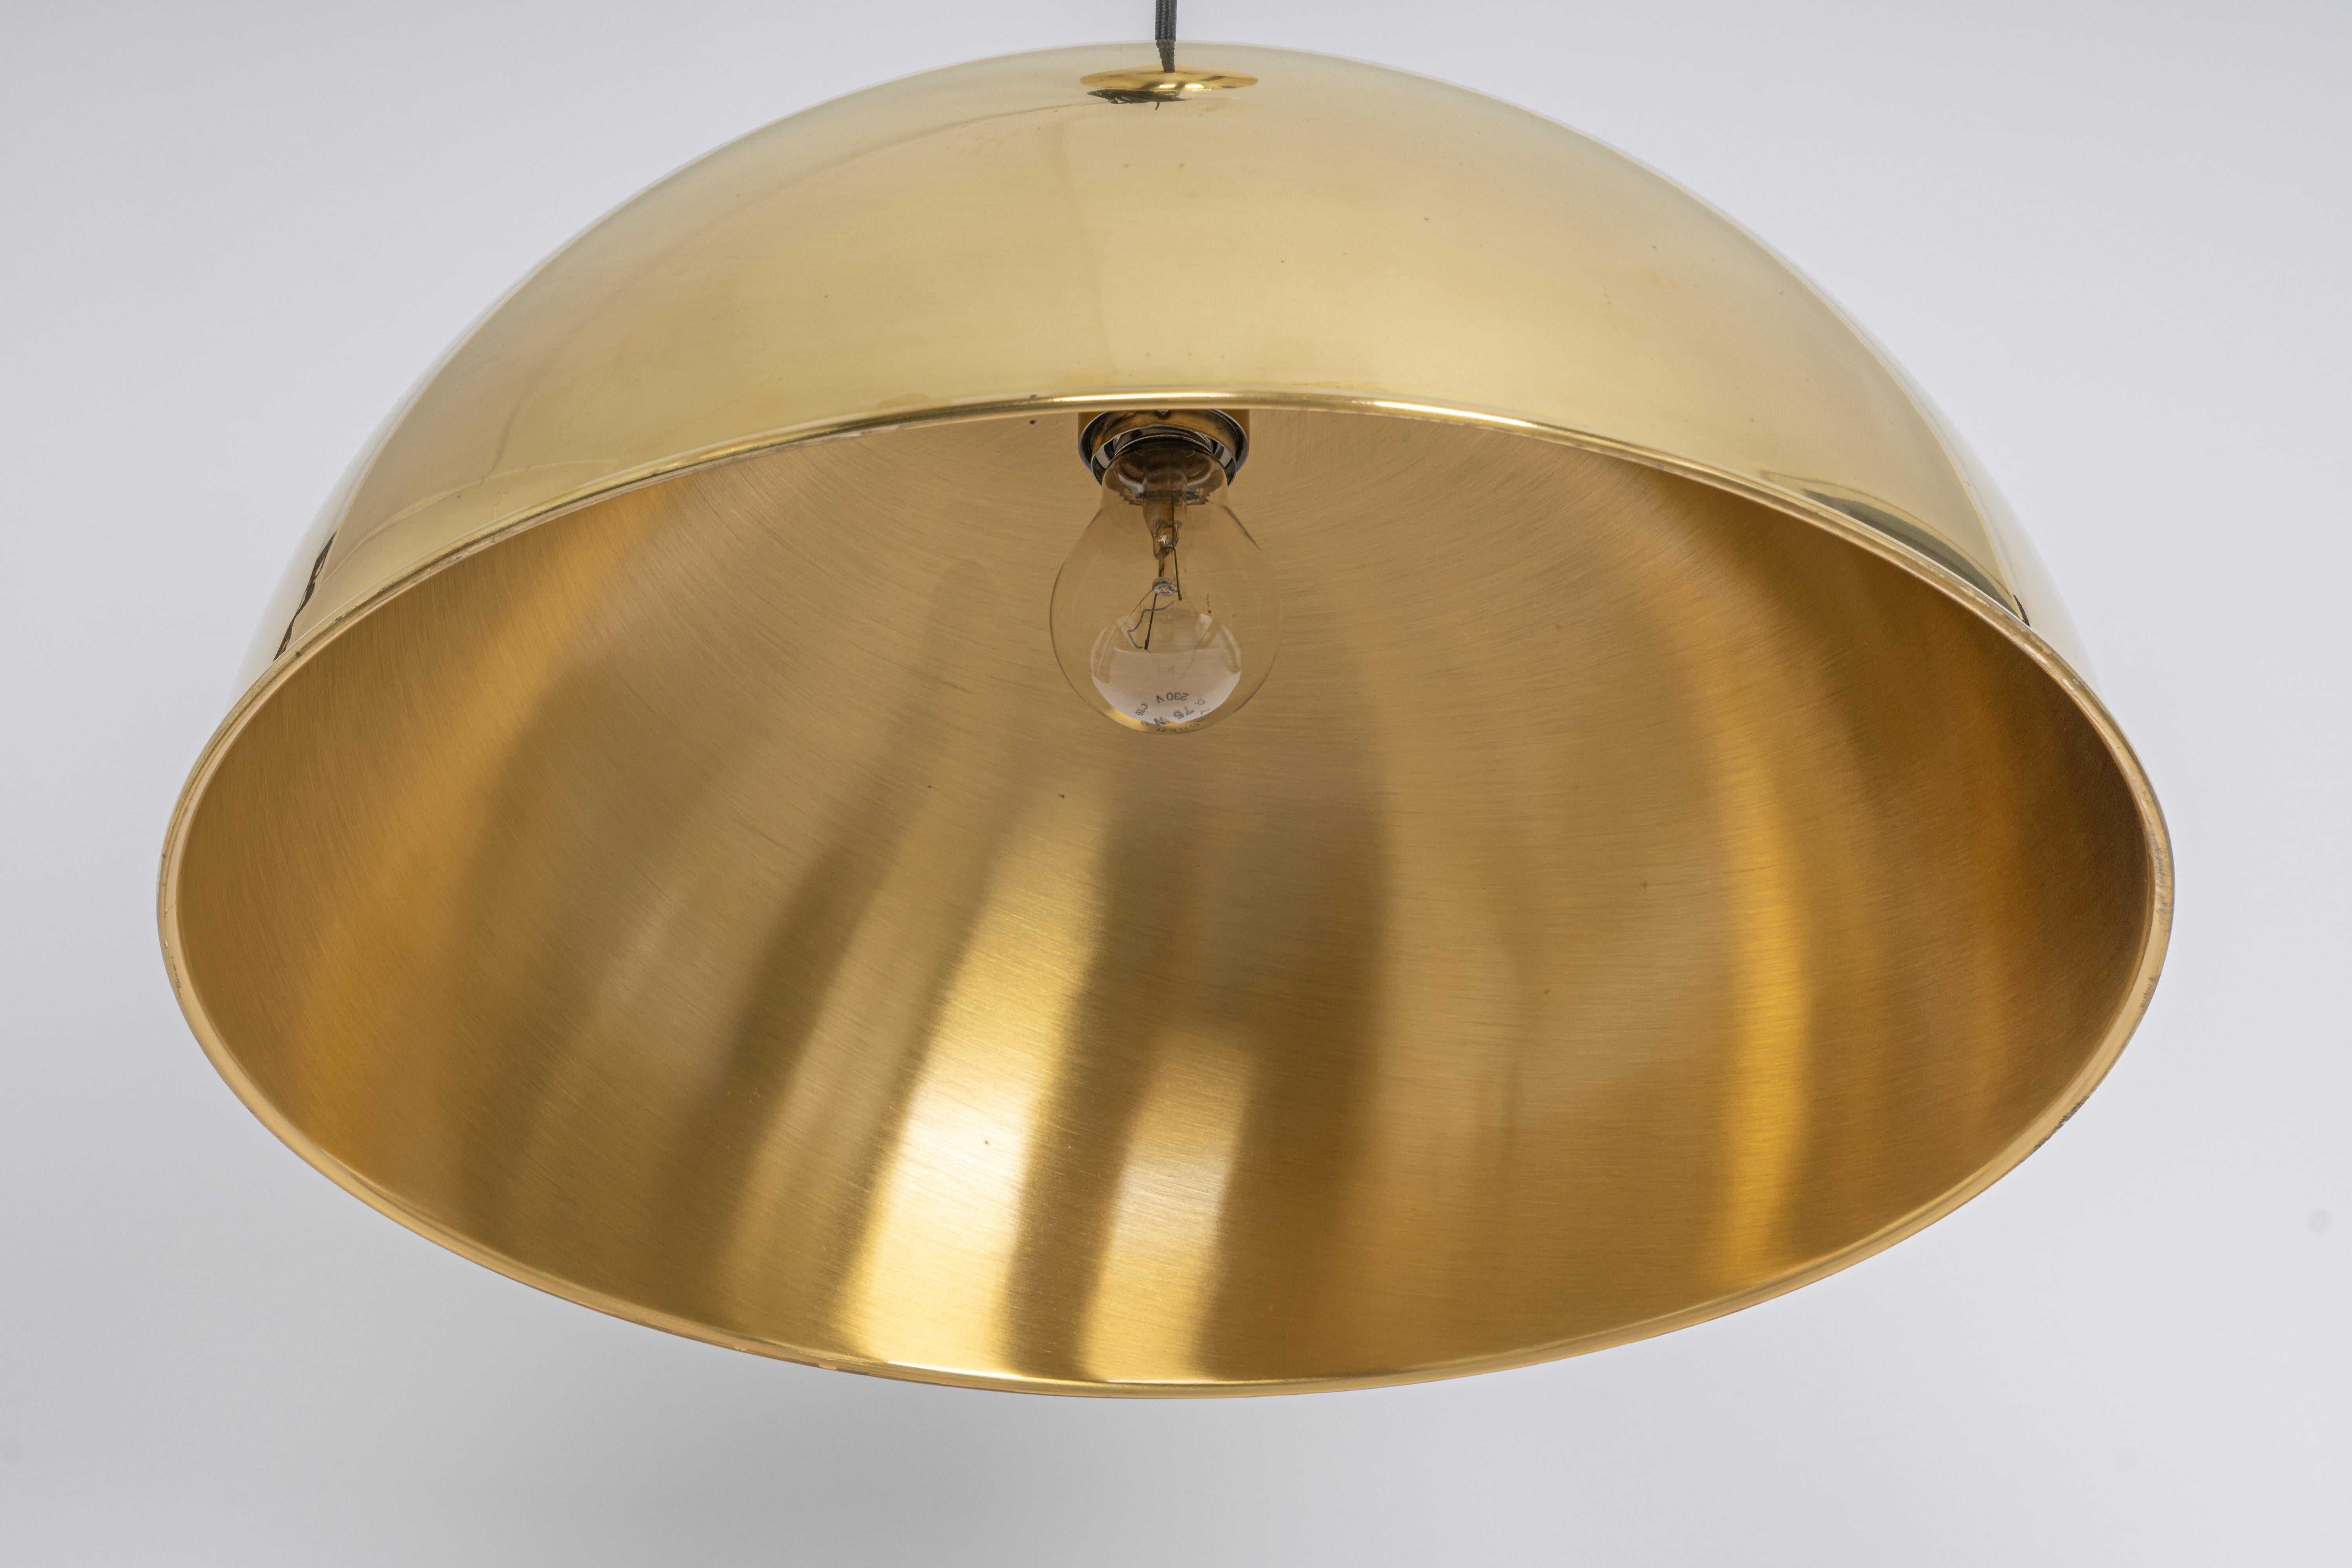 Stunning Posa brass pendant designed by Florian Schulz, Germany, 1970s

Large brass dome with Cloth cord.
Good vintage condition, with signs of age and use ( very small scratches and tiny dents). Height is adjustable.
Socket: 1 x standard bulb -